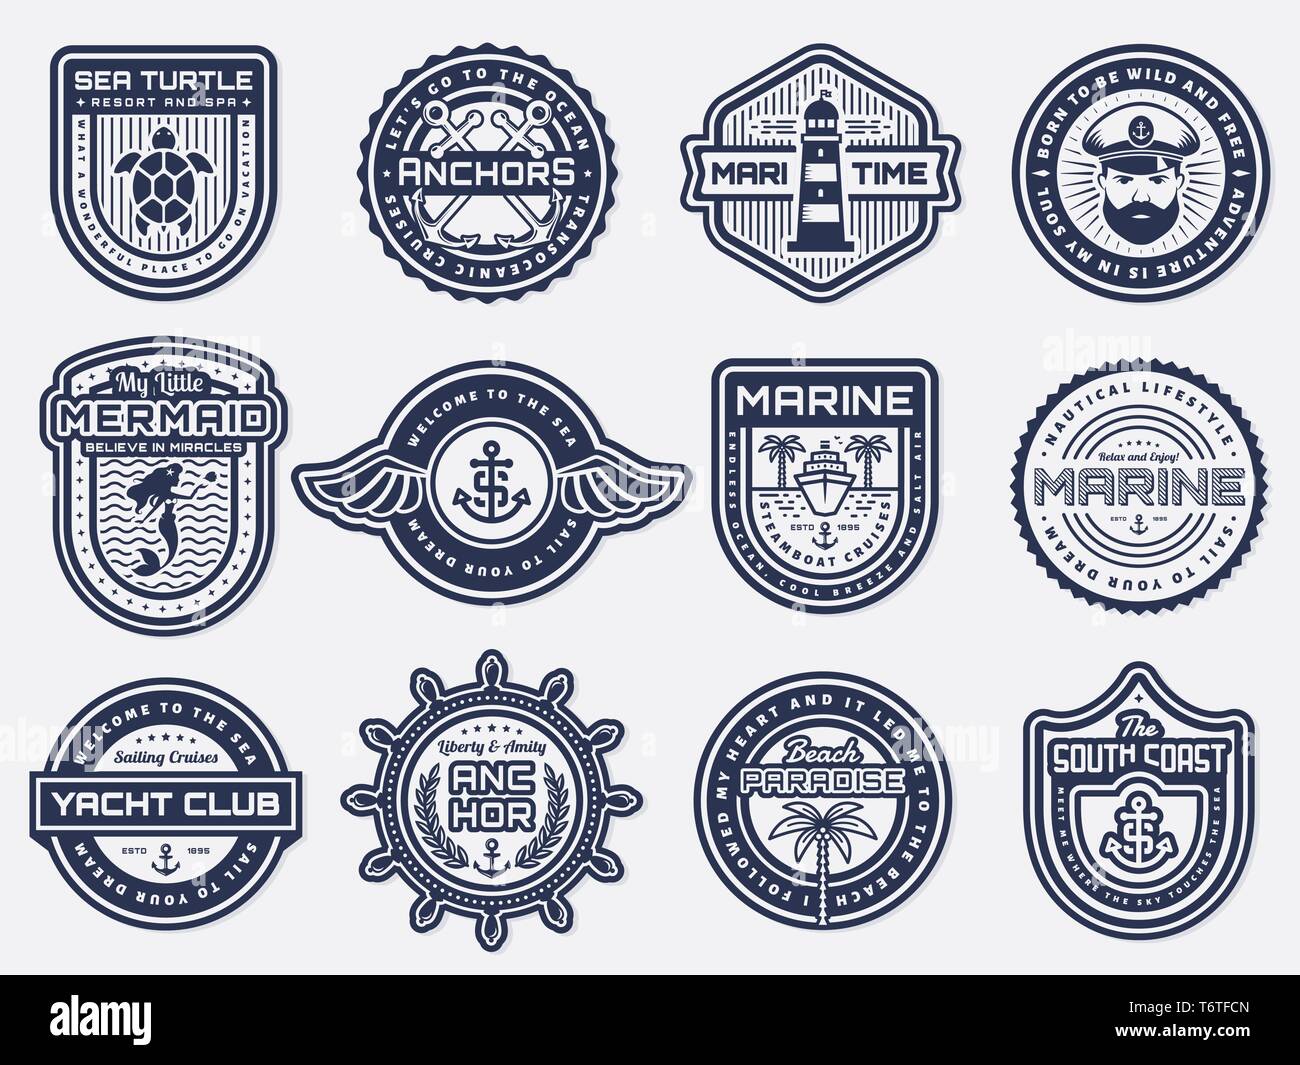 Nautical emblems with anchors, steering wheel, lighthouse. Sea cruise, yachting, travel, beach resort themes. Vintage badges, patches and labels. Stock Vector